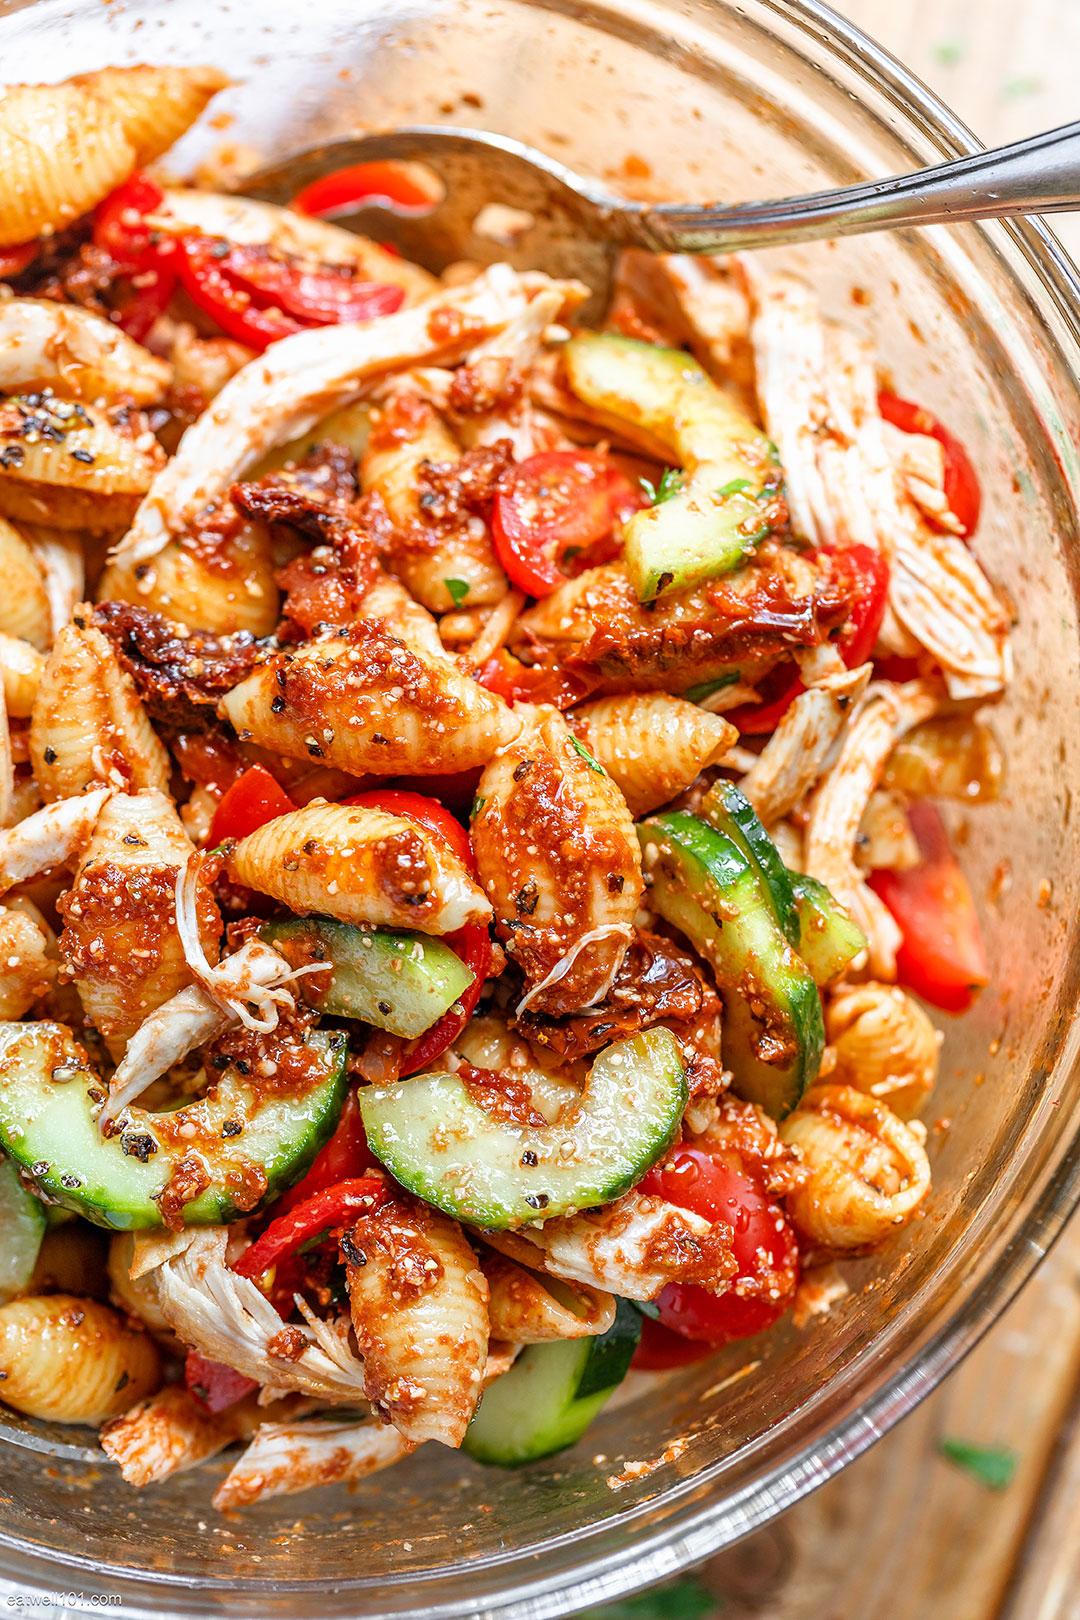 Healthy Roasted Chicken Pasta Salad Recipe with Cucumber, Tomato, and